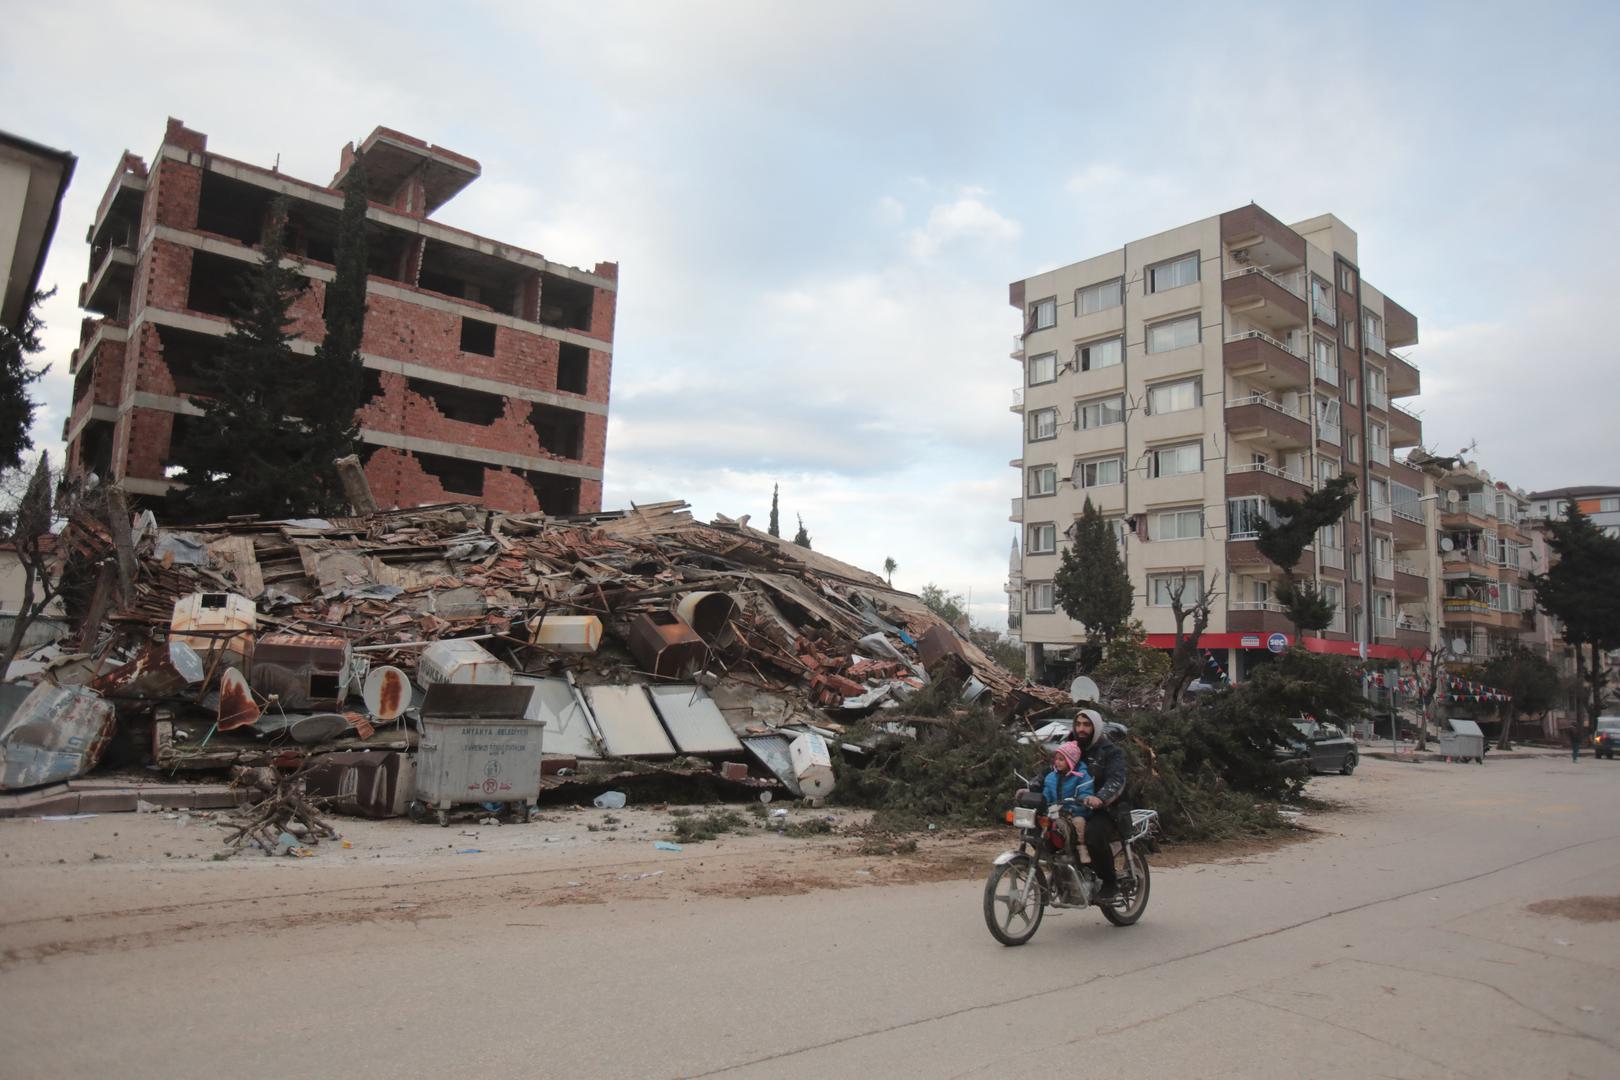 Victims of the earthquake wait near the ruins of their building in Hatay, Turkey, February 7, 2023. A powerful earthquake has hit a wide area in south-eastern Turkey, near the Syrian border, killing more than 7000 people and trapping many others. Photo by Serdar Ozsoy/Depo Photos/ABACAPRESS.COM Photo: Depo Photos/ABACA/ABACA